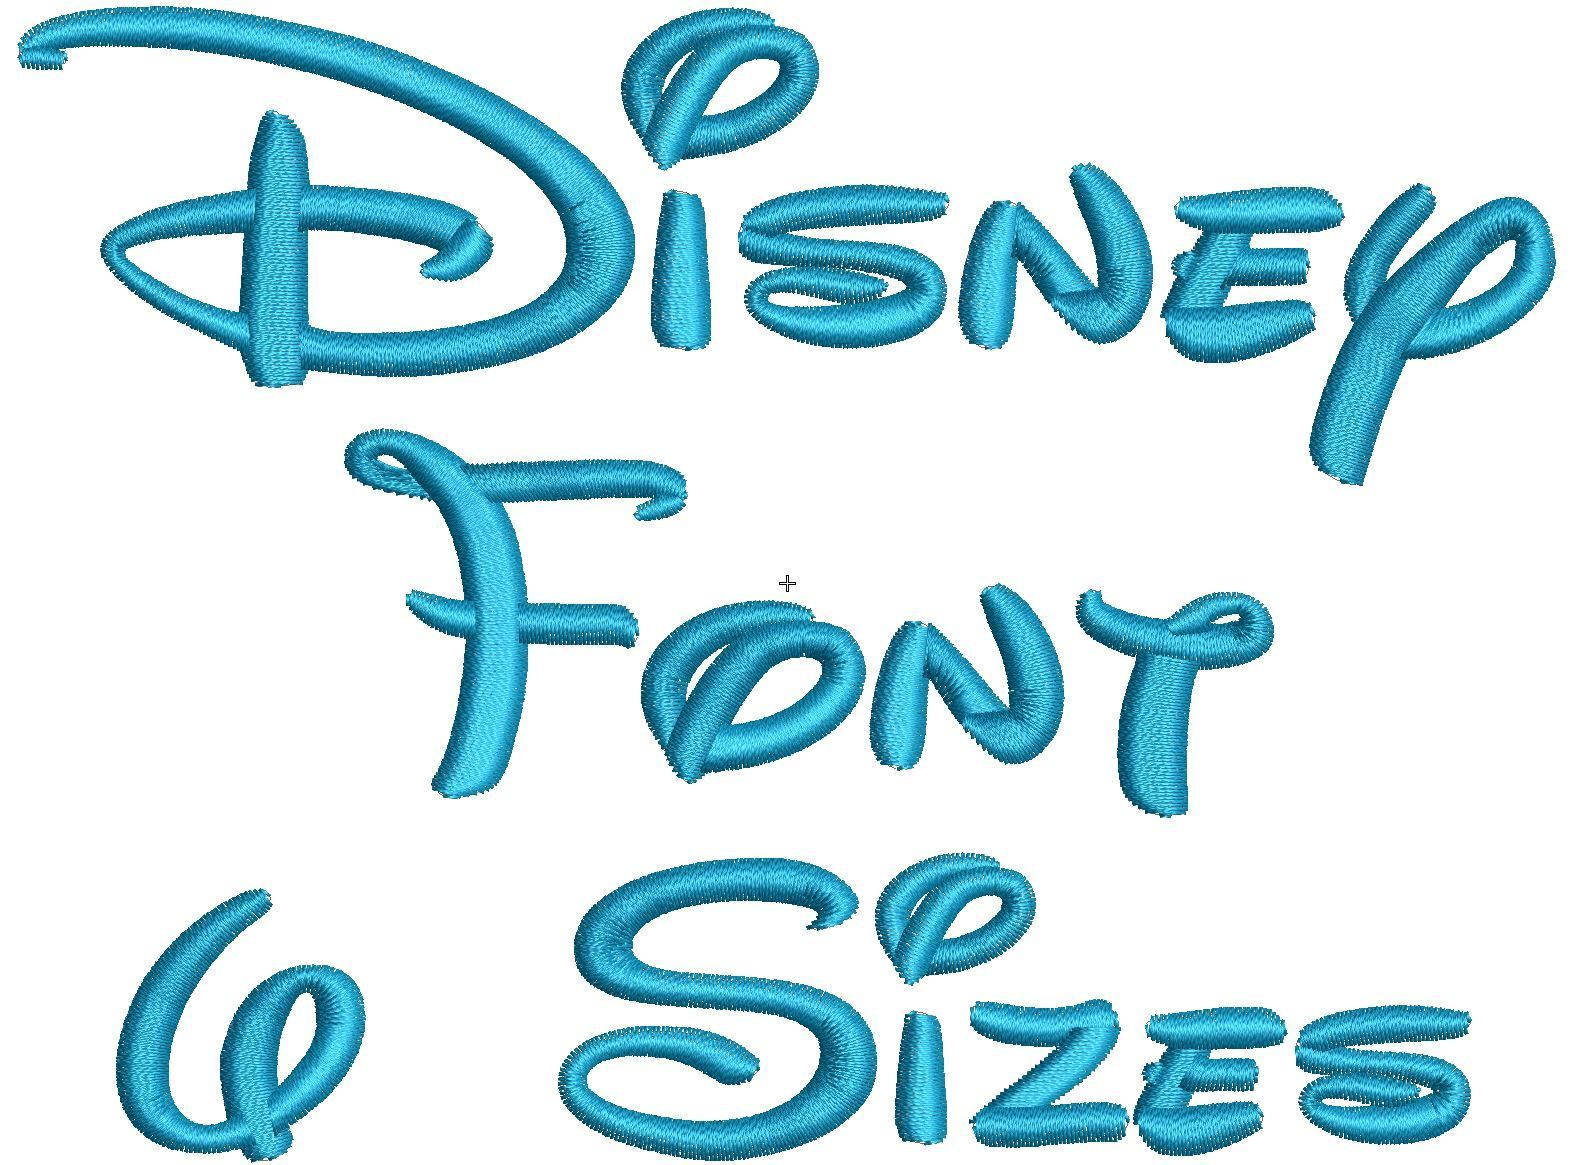 Disney Embroidery Patterns 12 Disney Embroidery Font Images Disney Applique For Machine